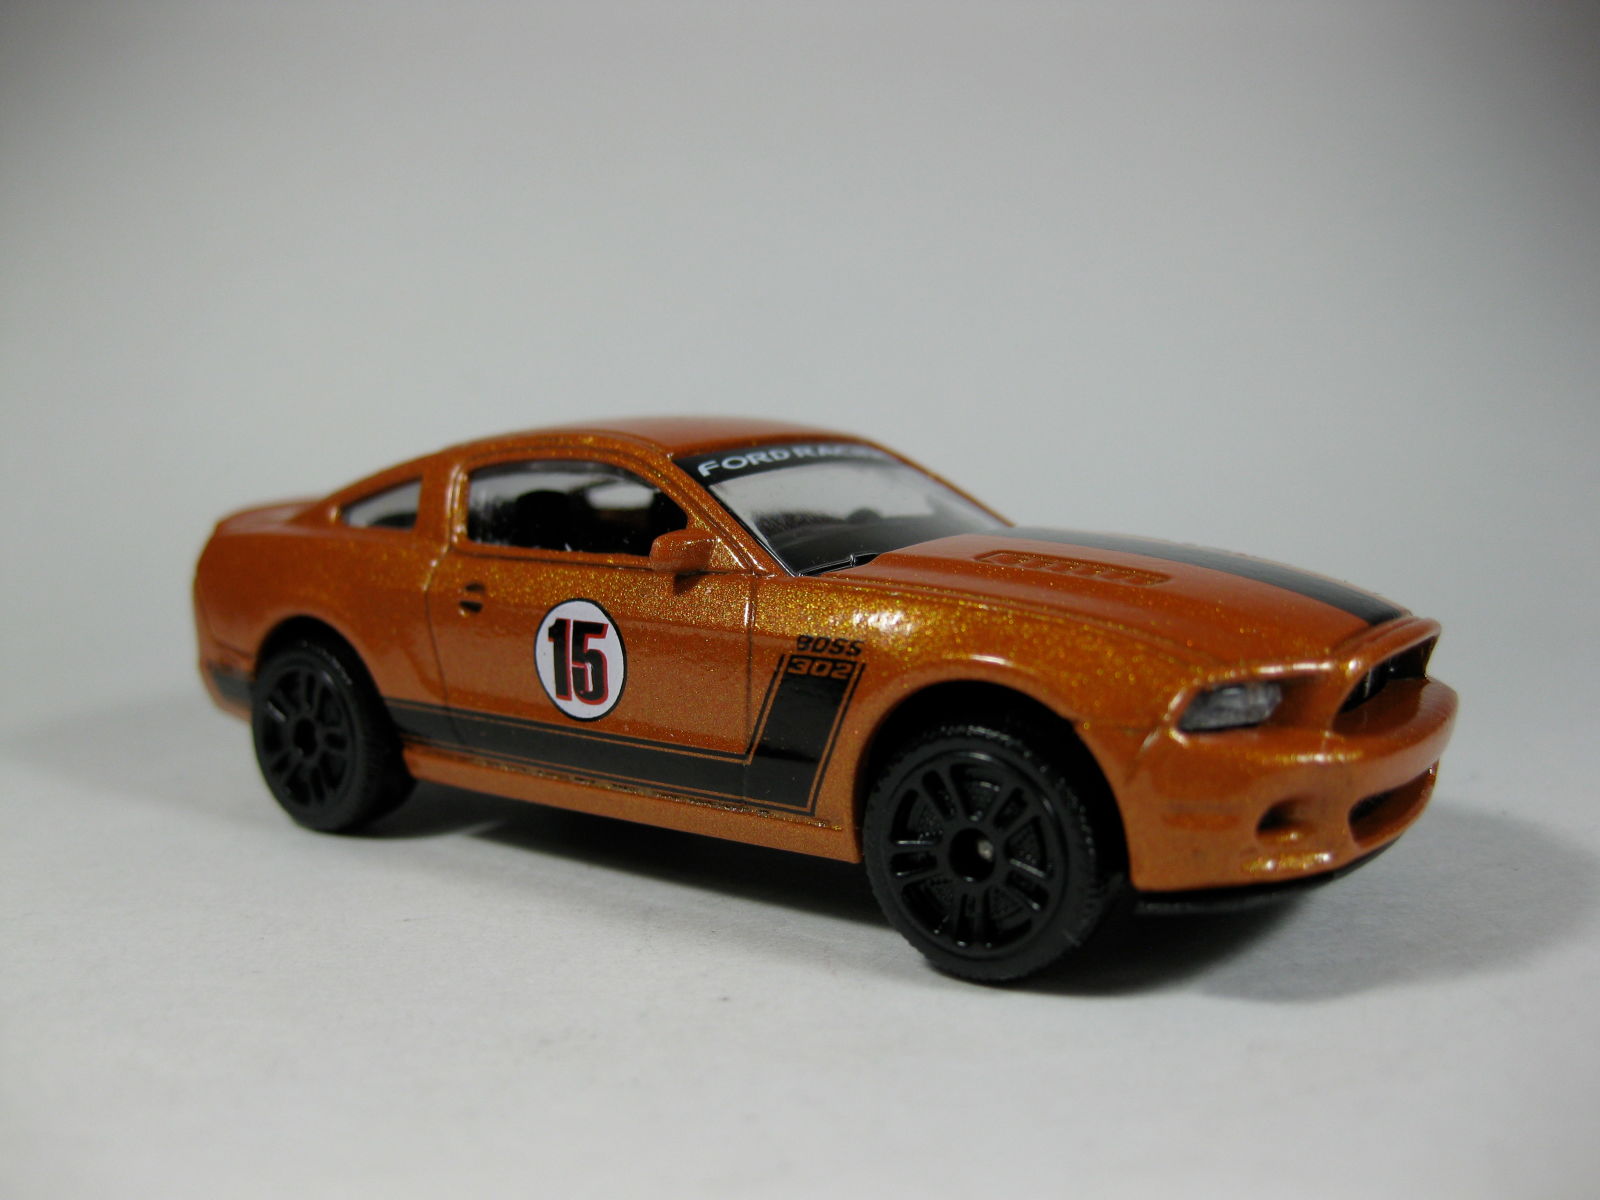 Illustration for article titled Majorette Racing Cars Series 2 (Pt. 3 Ford Mustang)